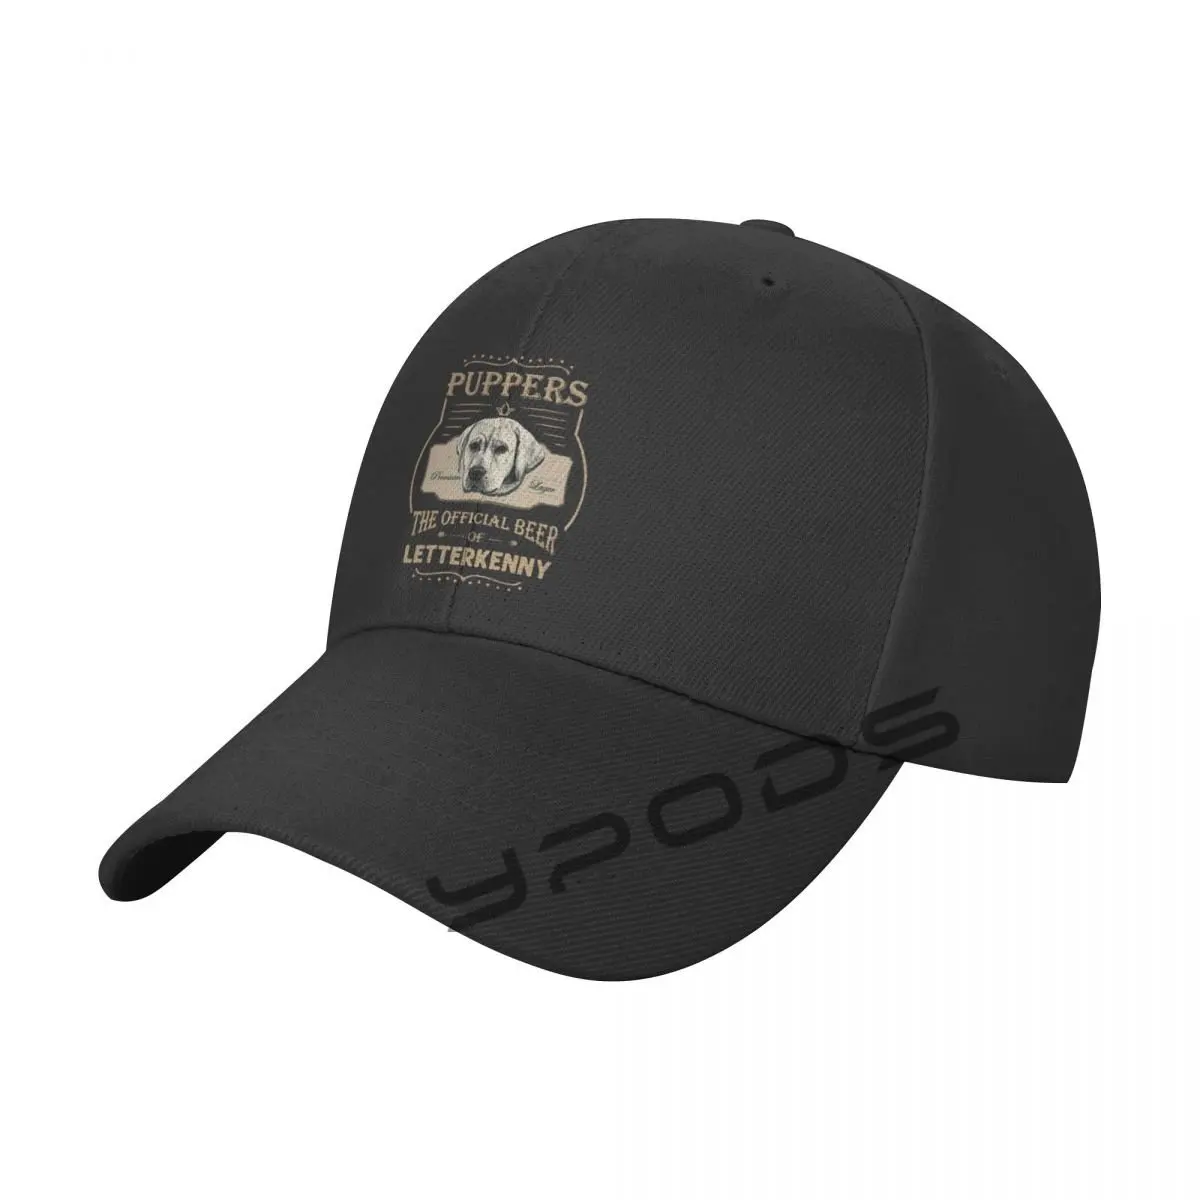 

Puppers Premium Larger The Offical Beer Of Letterkenny Men's Classic Baseball Cap Adjustable Buckle Dad Hat Sports Cap